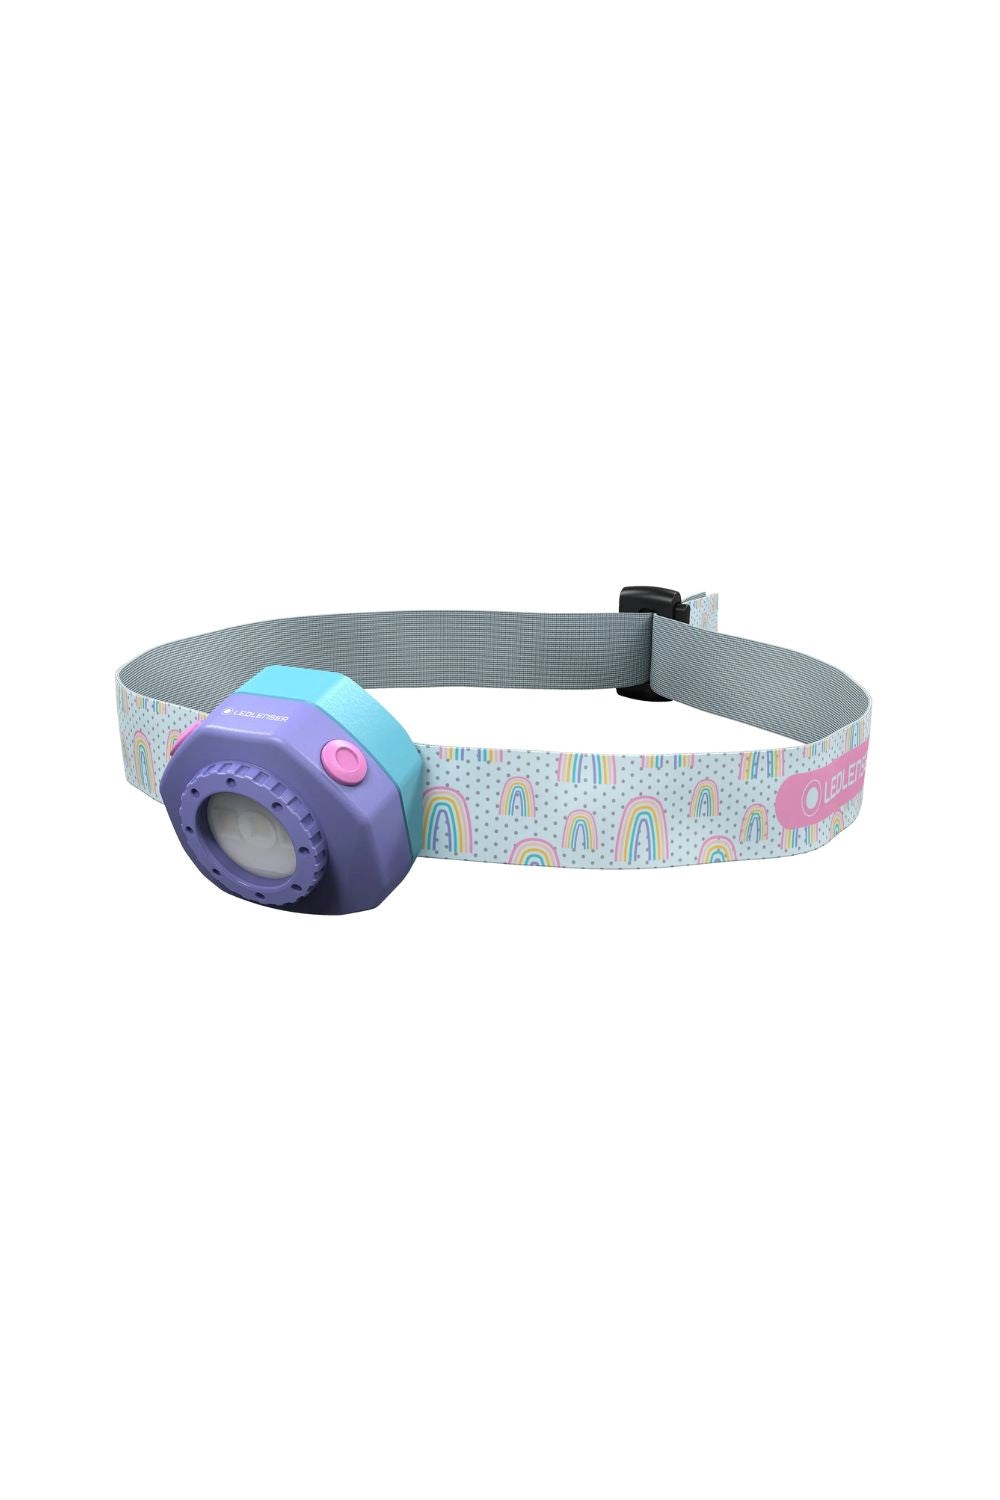 Kidled4r Rechargeable Adventure Led Head Torch -